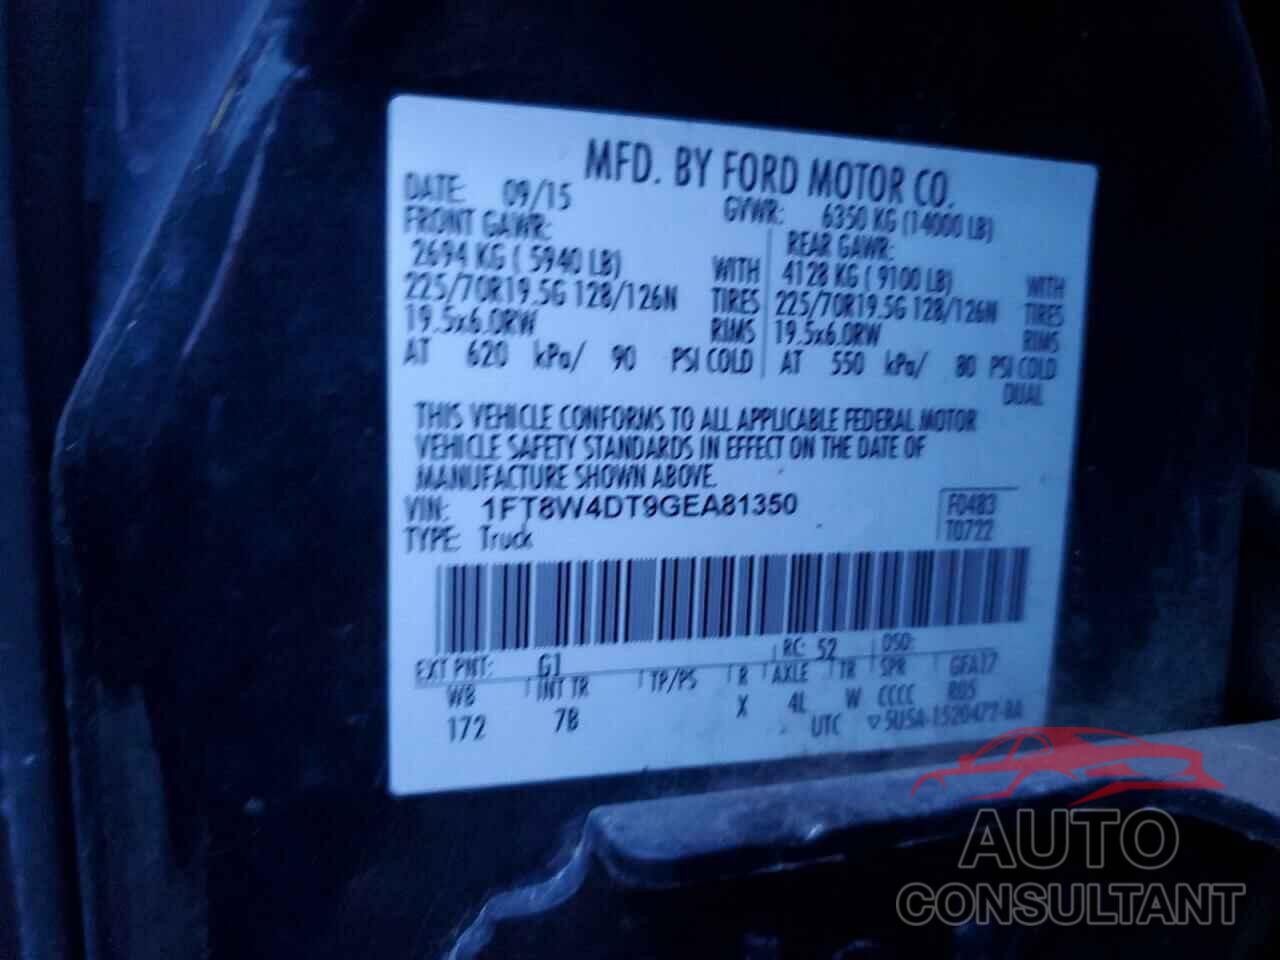 FORD F450 2016 - 1FT8W4DT9GEA81350